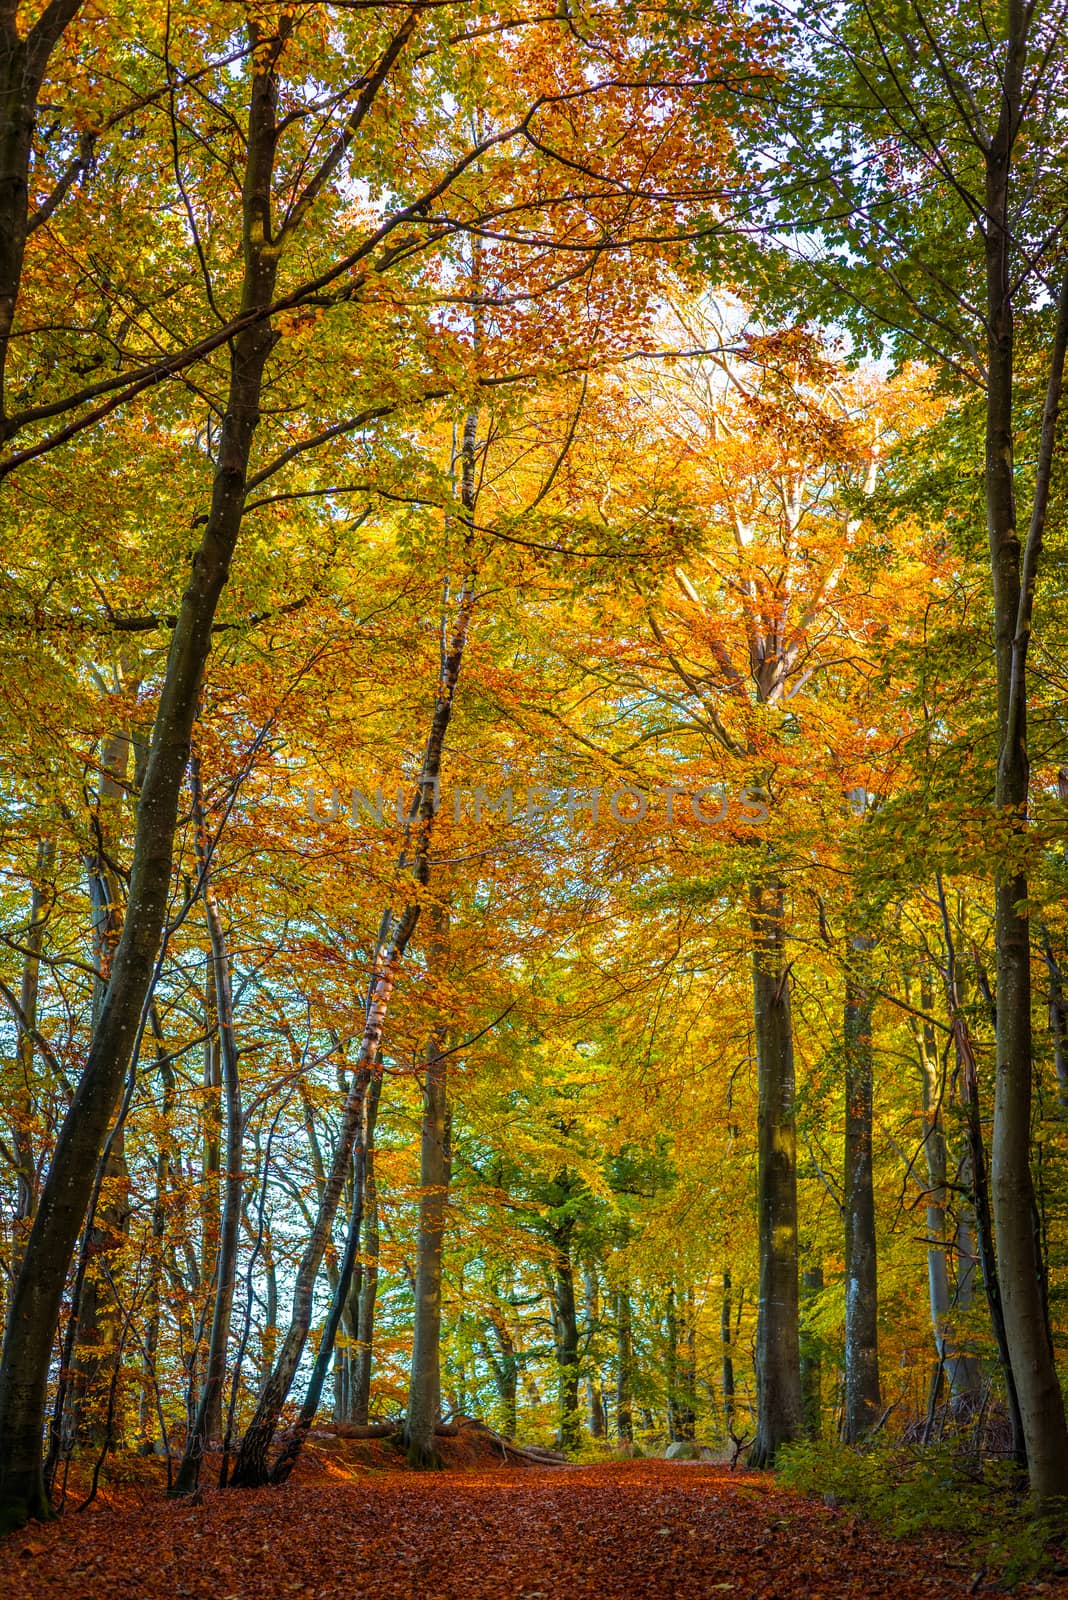 Tall trees with awrm colors in a forest at autumn